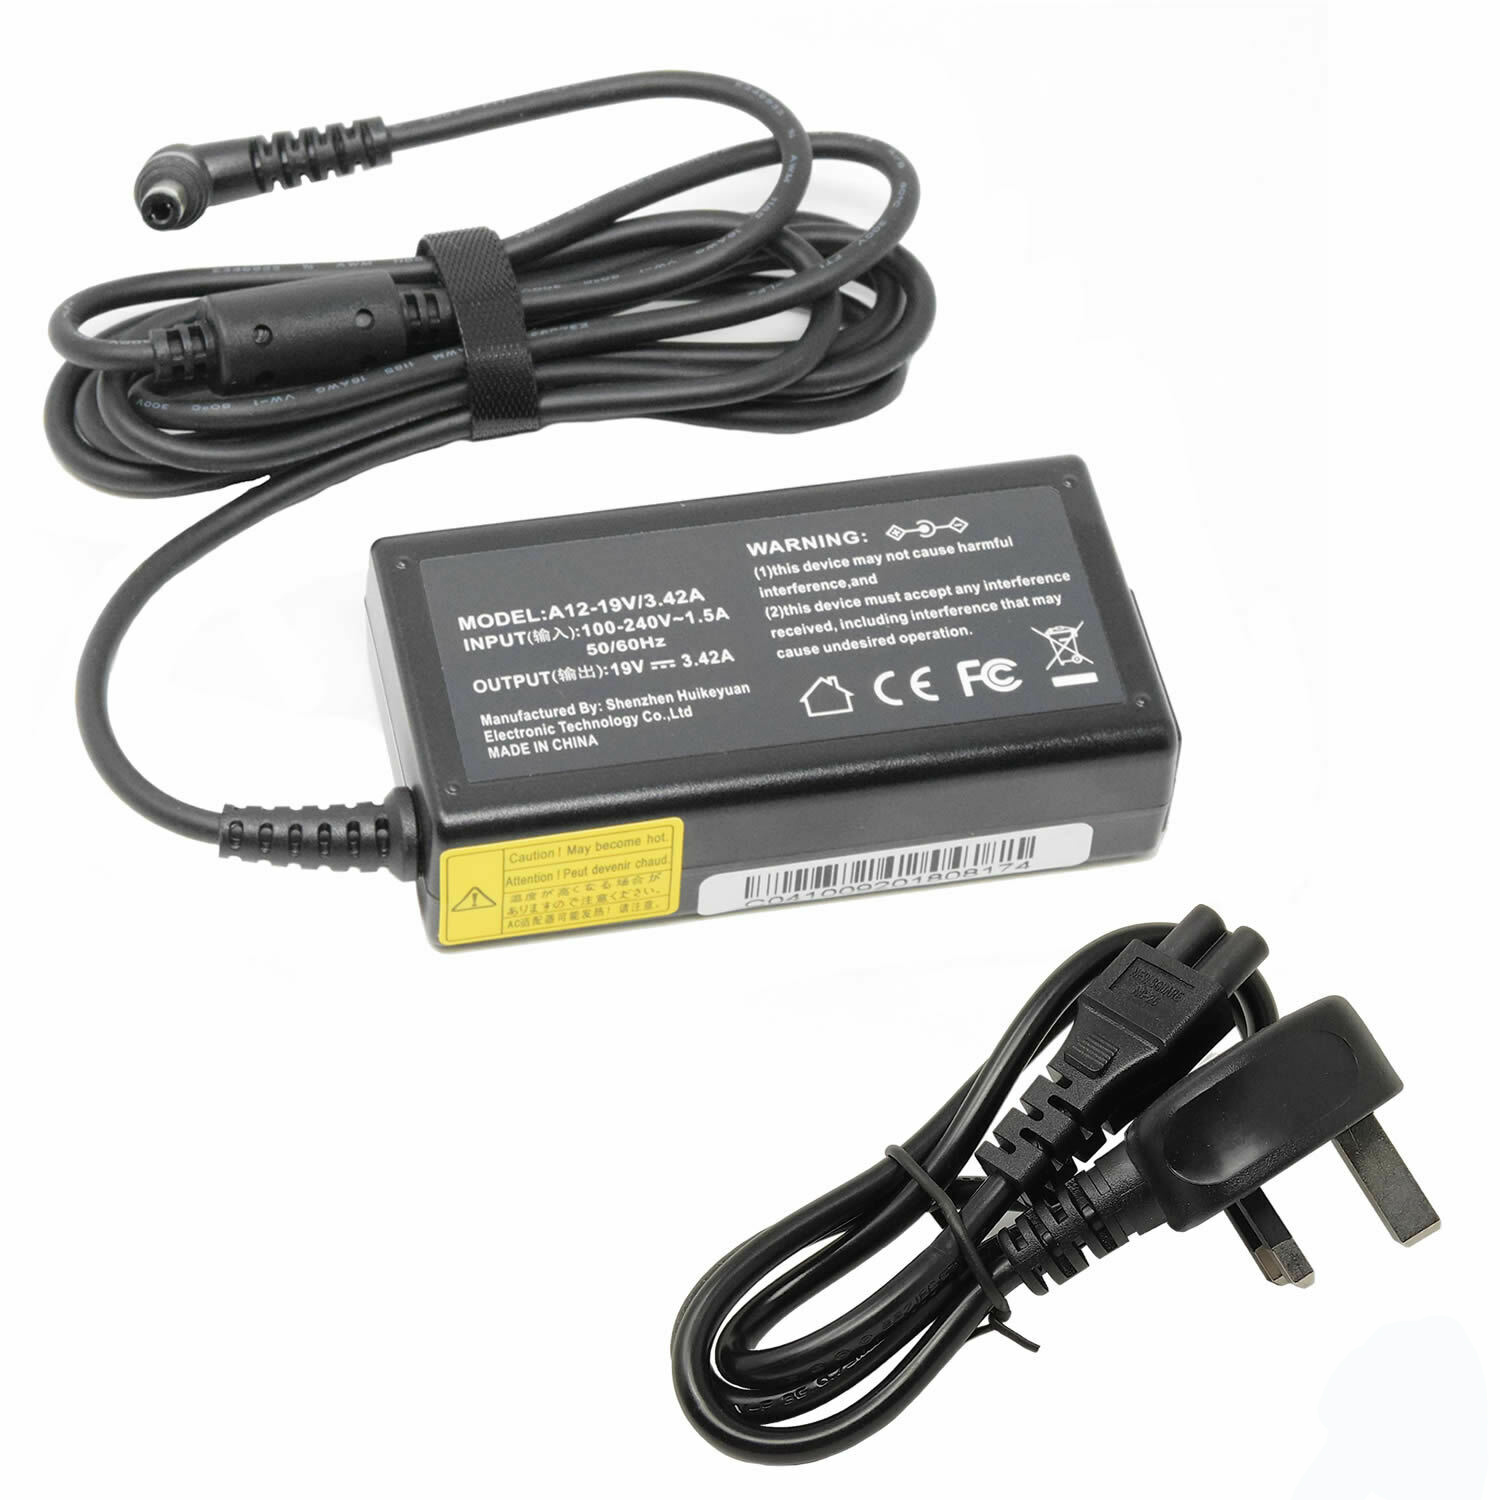 Toshiba Portege A30 Series Power Adapter Laptop Charger